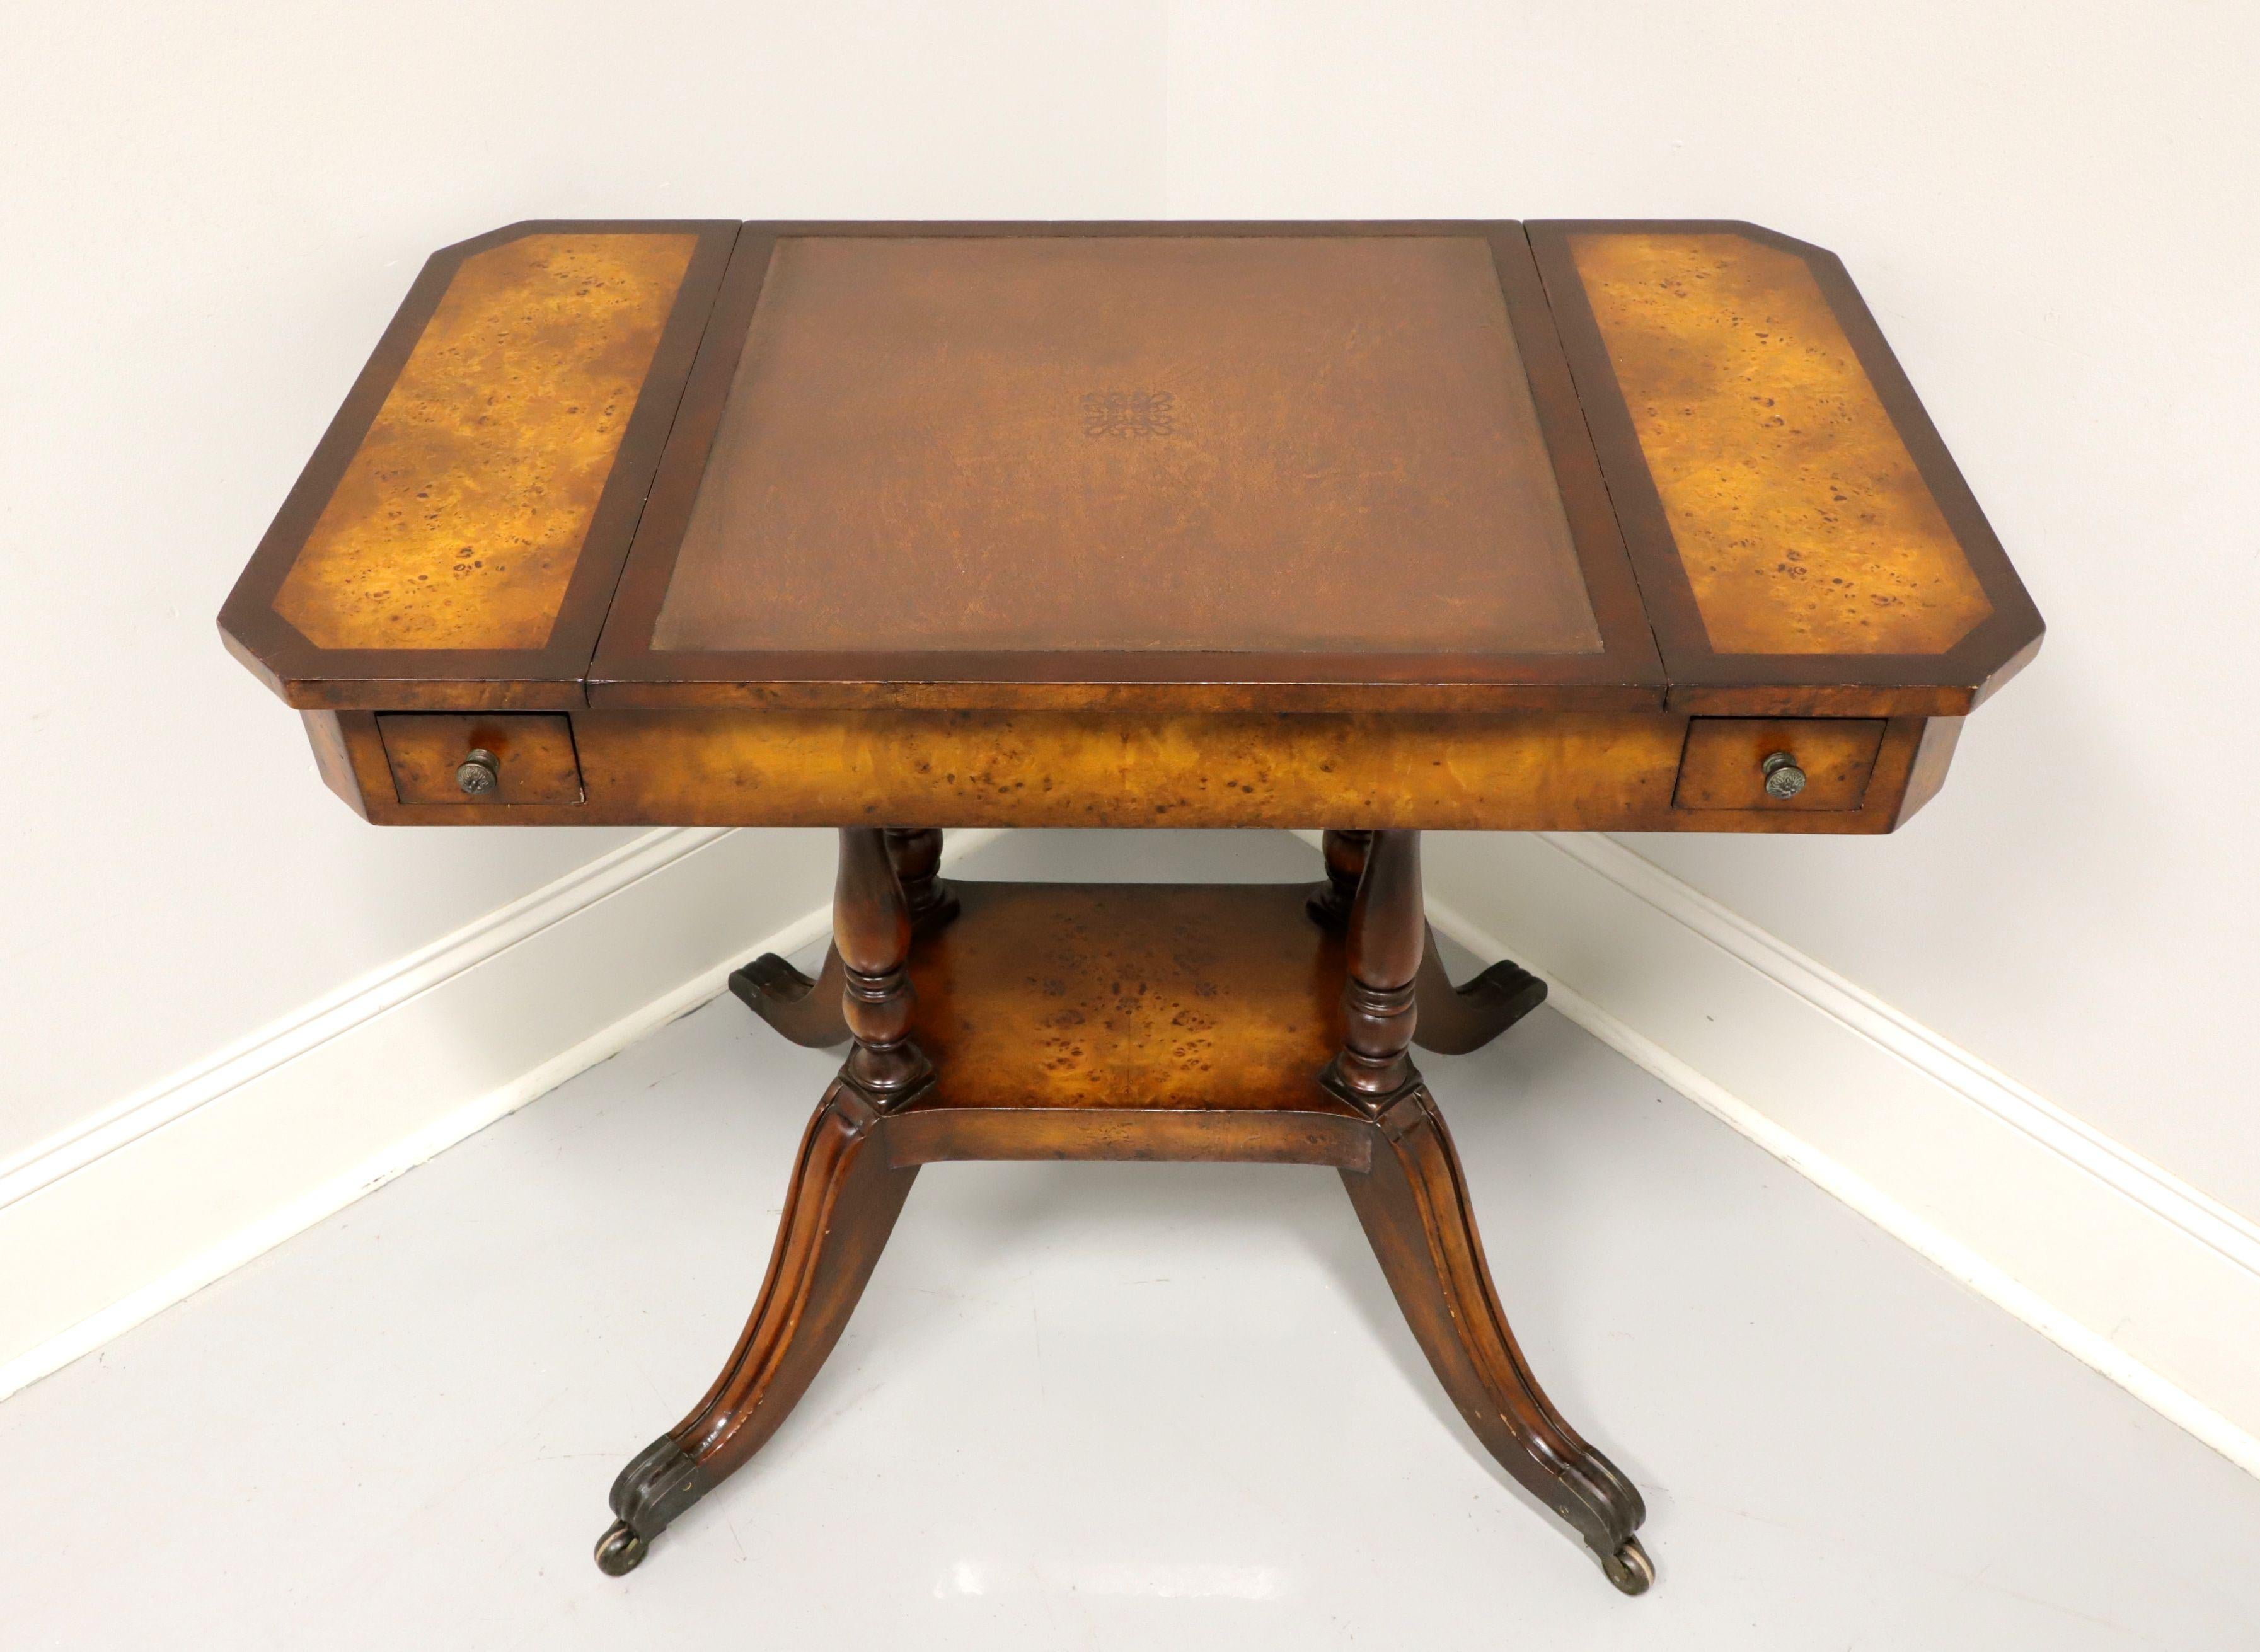 A Regency style game table, unbranded, similar quality to Maitland Smith. Mahogany, birdseye maple, tooled leather top, brass hardware, birdcage pedestal with four brass capped legs and brass casters. Features slide out reversible top with one side